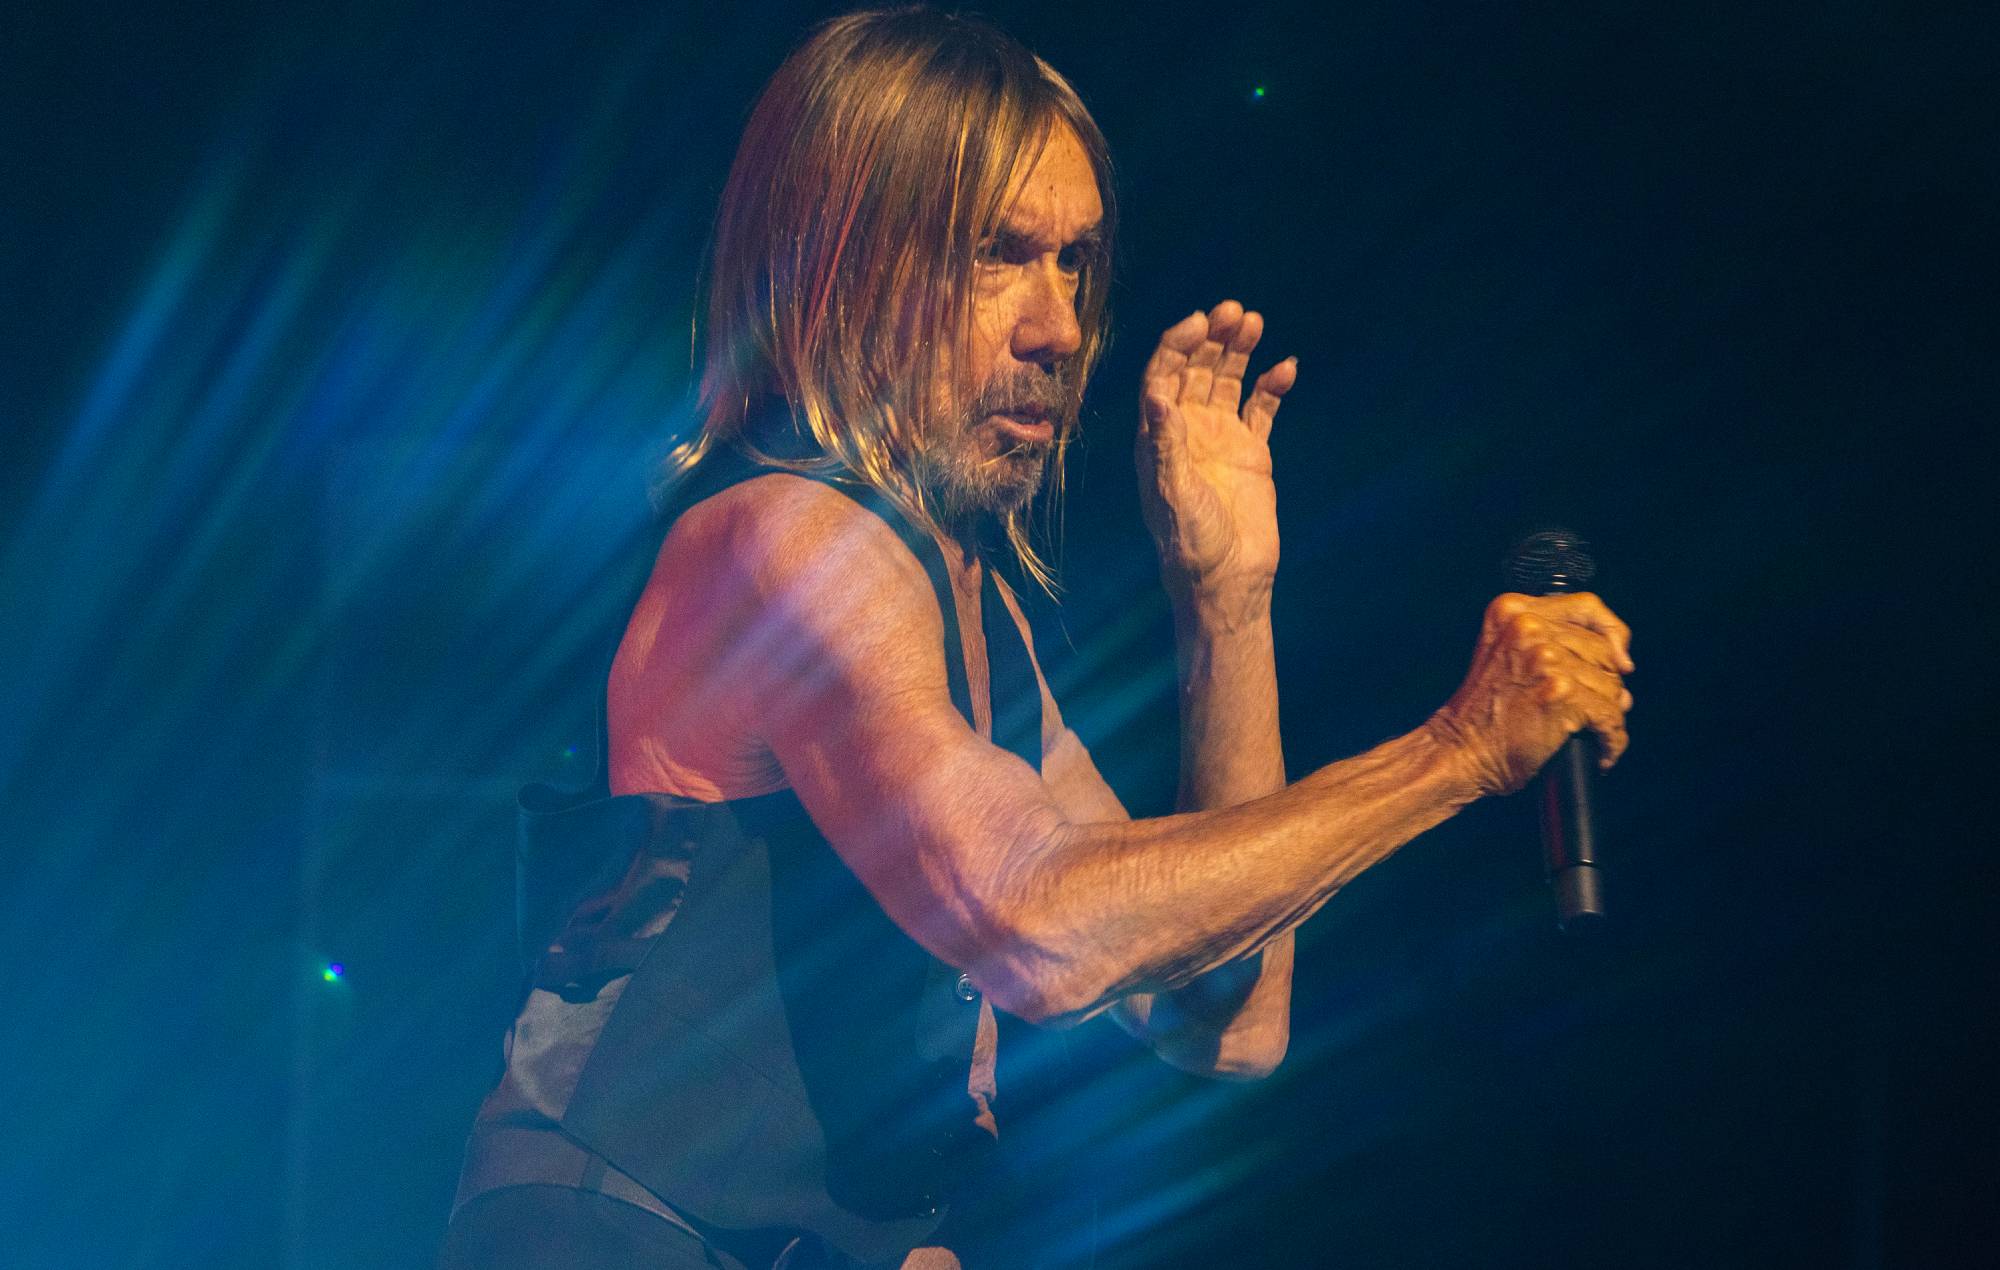 Watch Iggy Pop cover Lou Reed’s ‘Walk On The Wild Side’ with Duff McKagan, Chad Smith and more